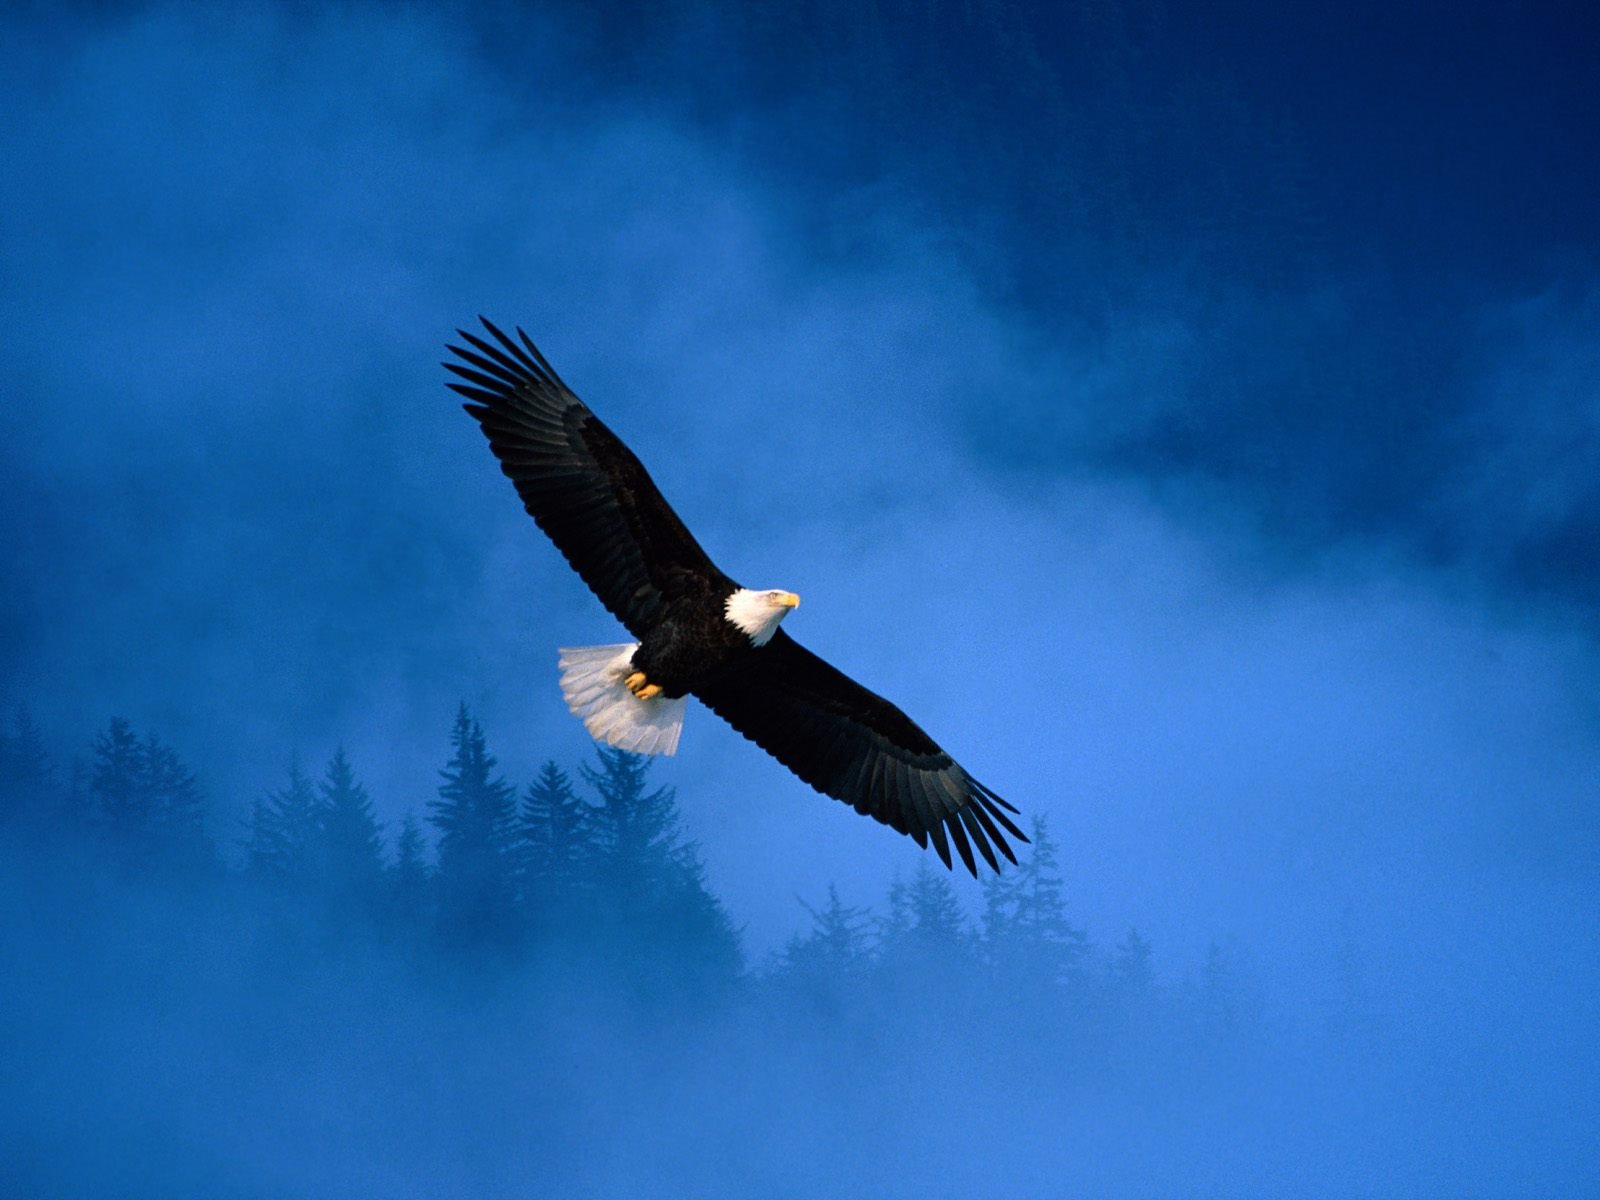 Flight of Freedom Bald Eagle Wallpapers HD Wallpapers 1600x1200